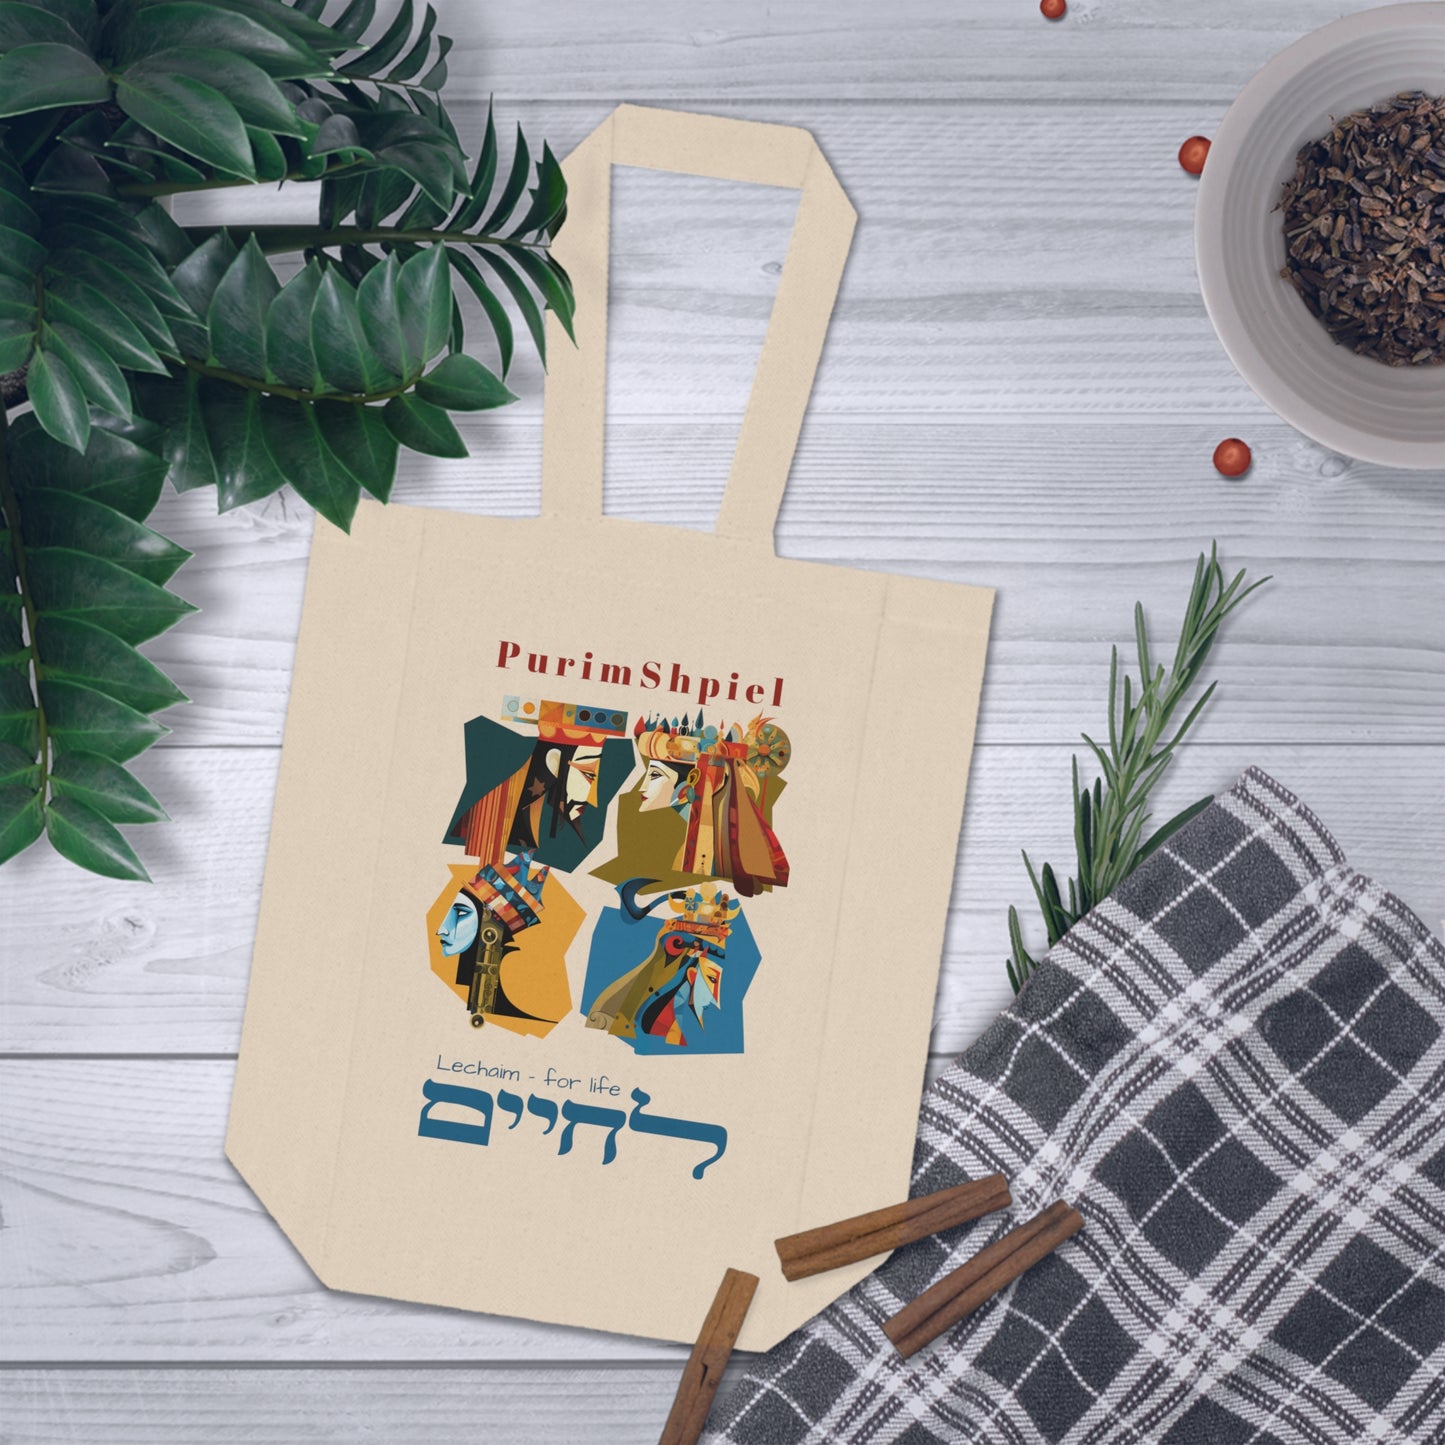 Purim Spiel Mishloach Manot Double Wine Tote Gift Bag